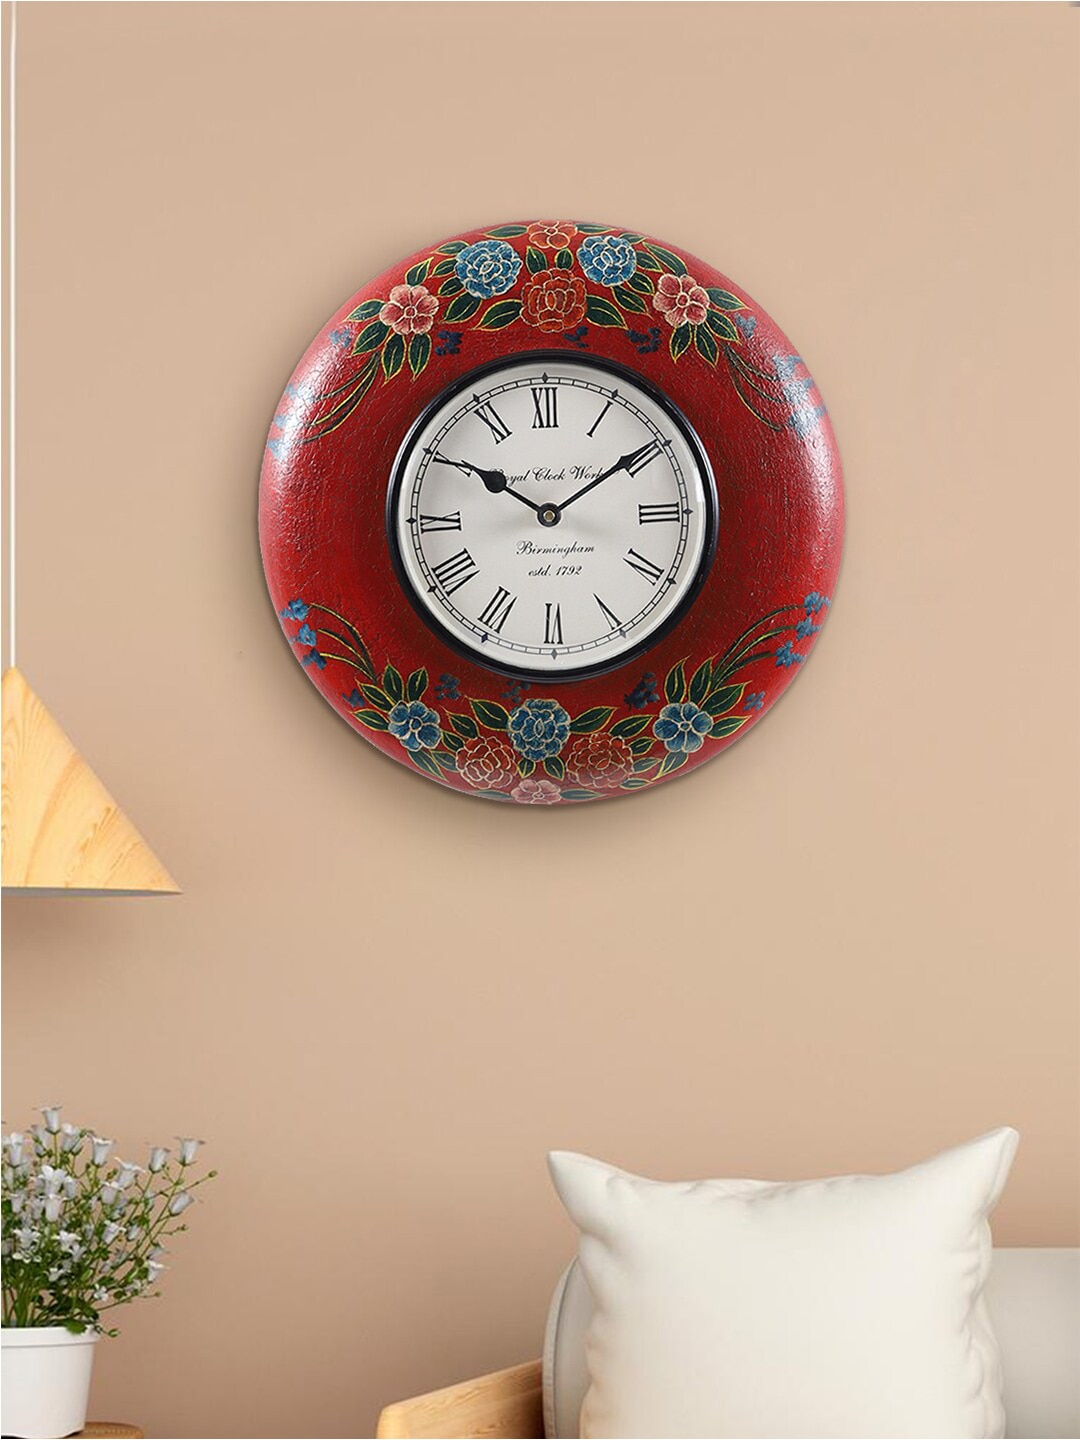 Aapno Rajasthan Red & Green Hand-Painted 29 cm Traditional Analogue Wall Clock Price in India